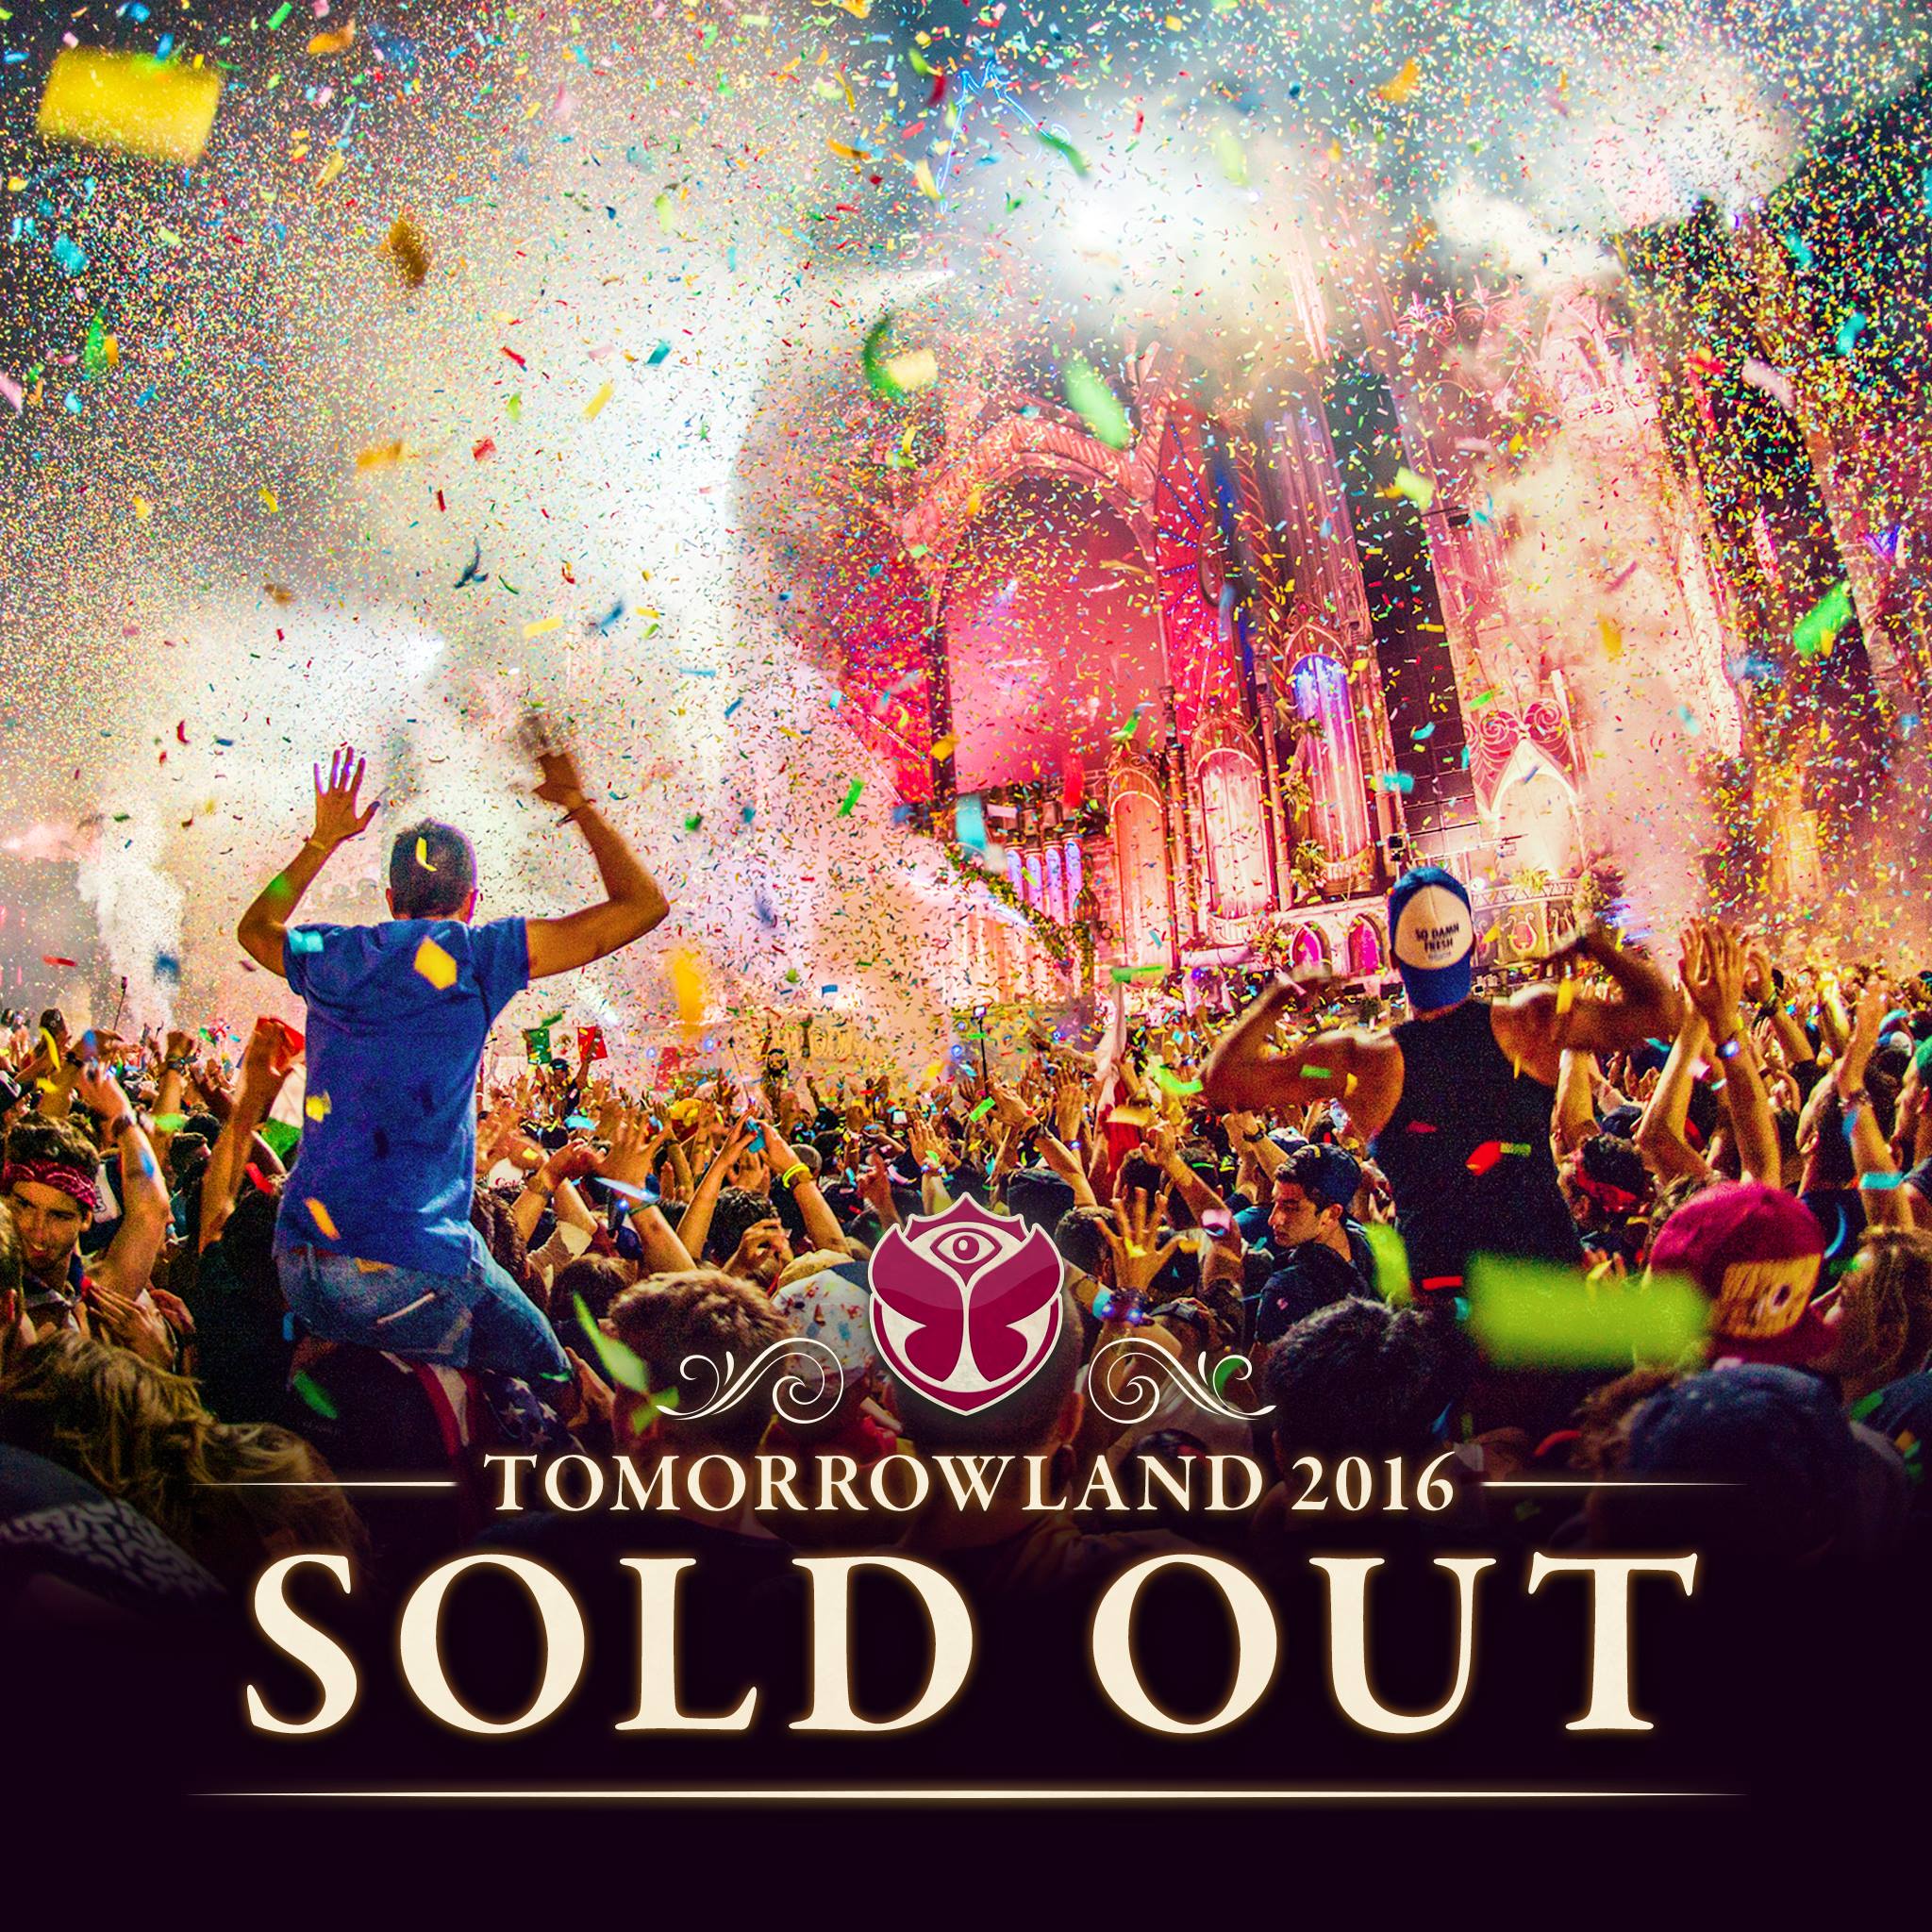 Tomorrowland 2016 SOLD OUT